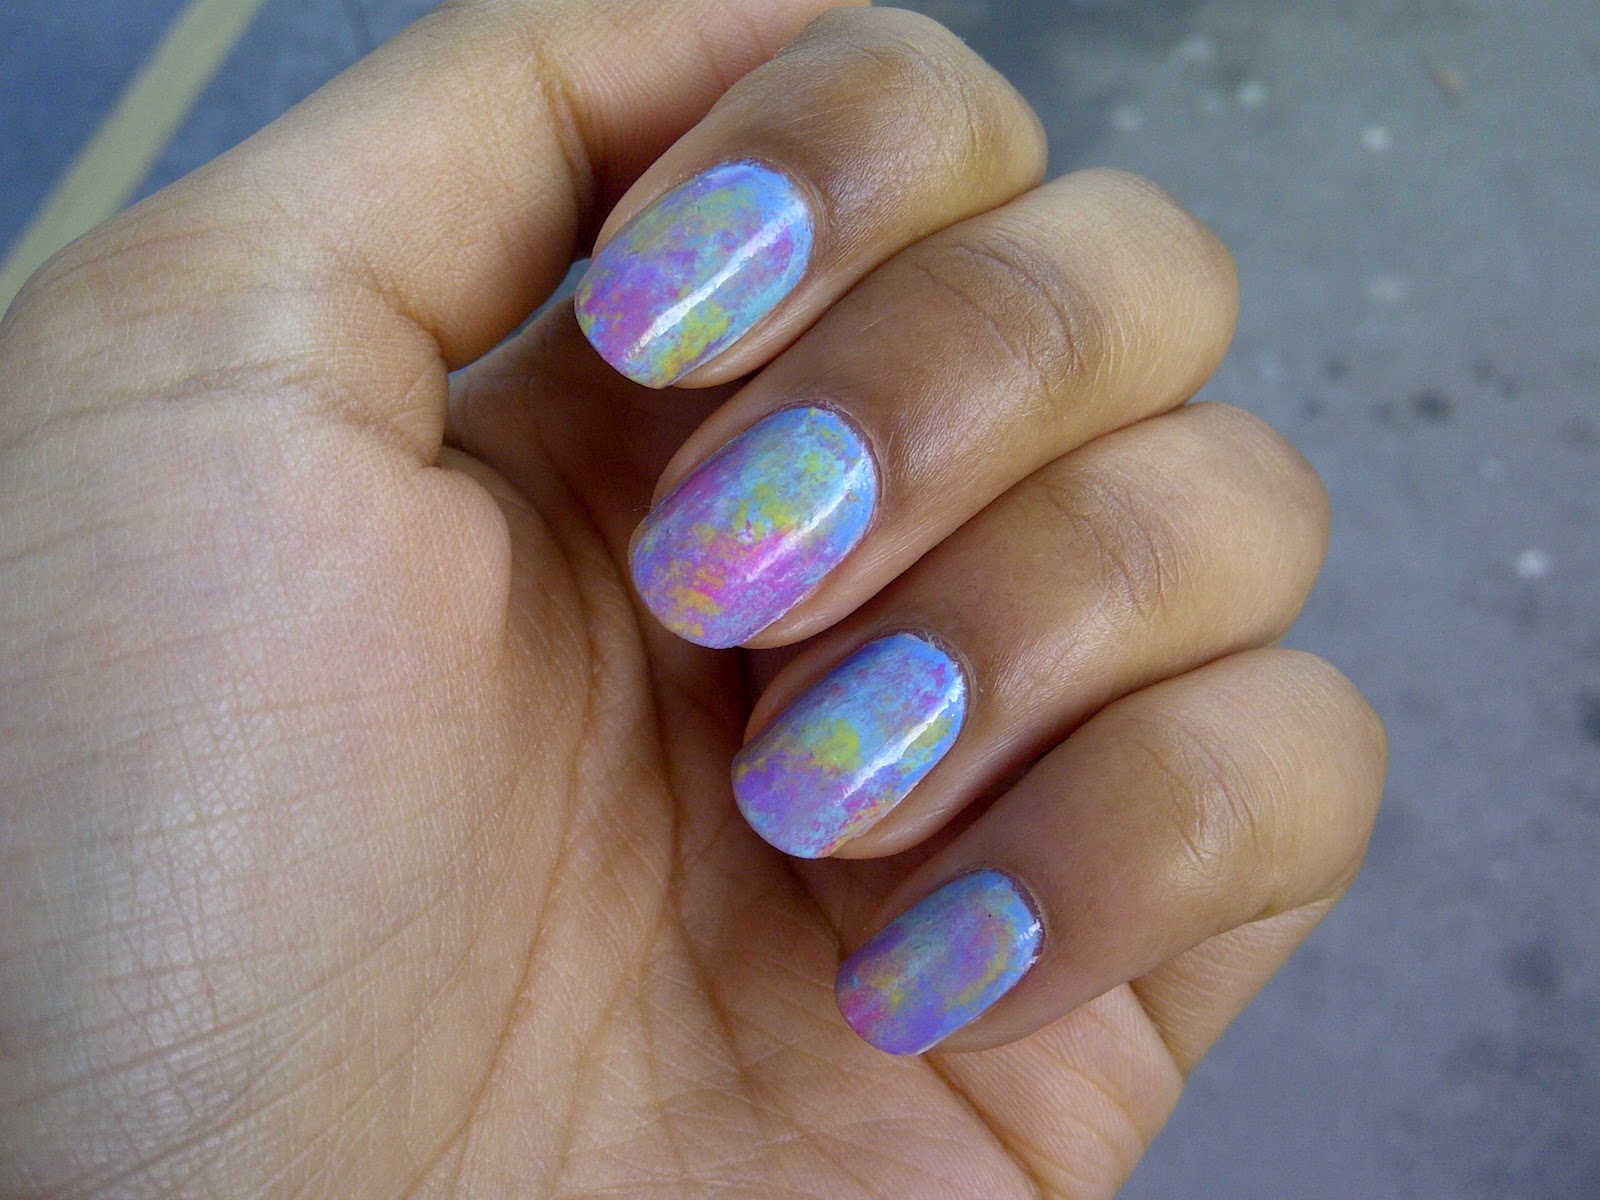 2. How to Create a Tie Dye Effect with Gel Polish - wide 1